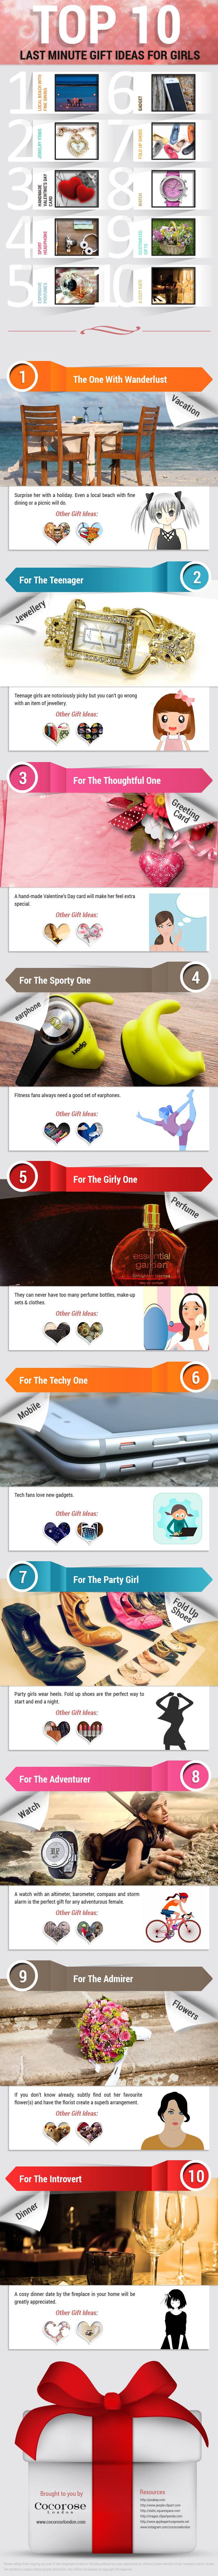 10 Valentine’s Day Gifts For Girls [Infographic]